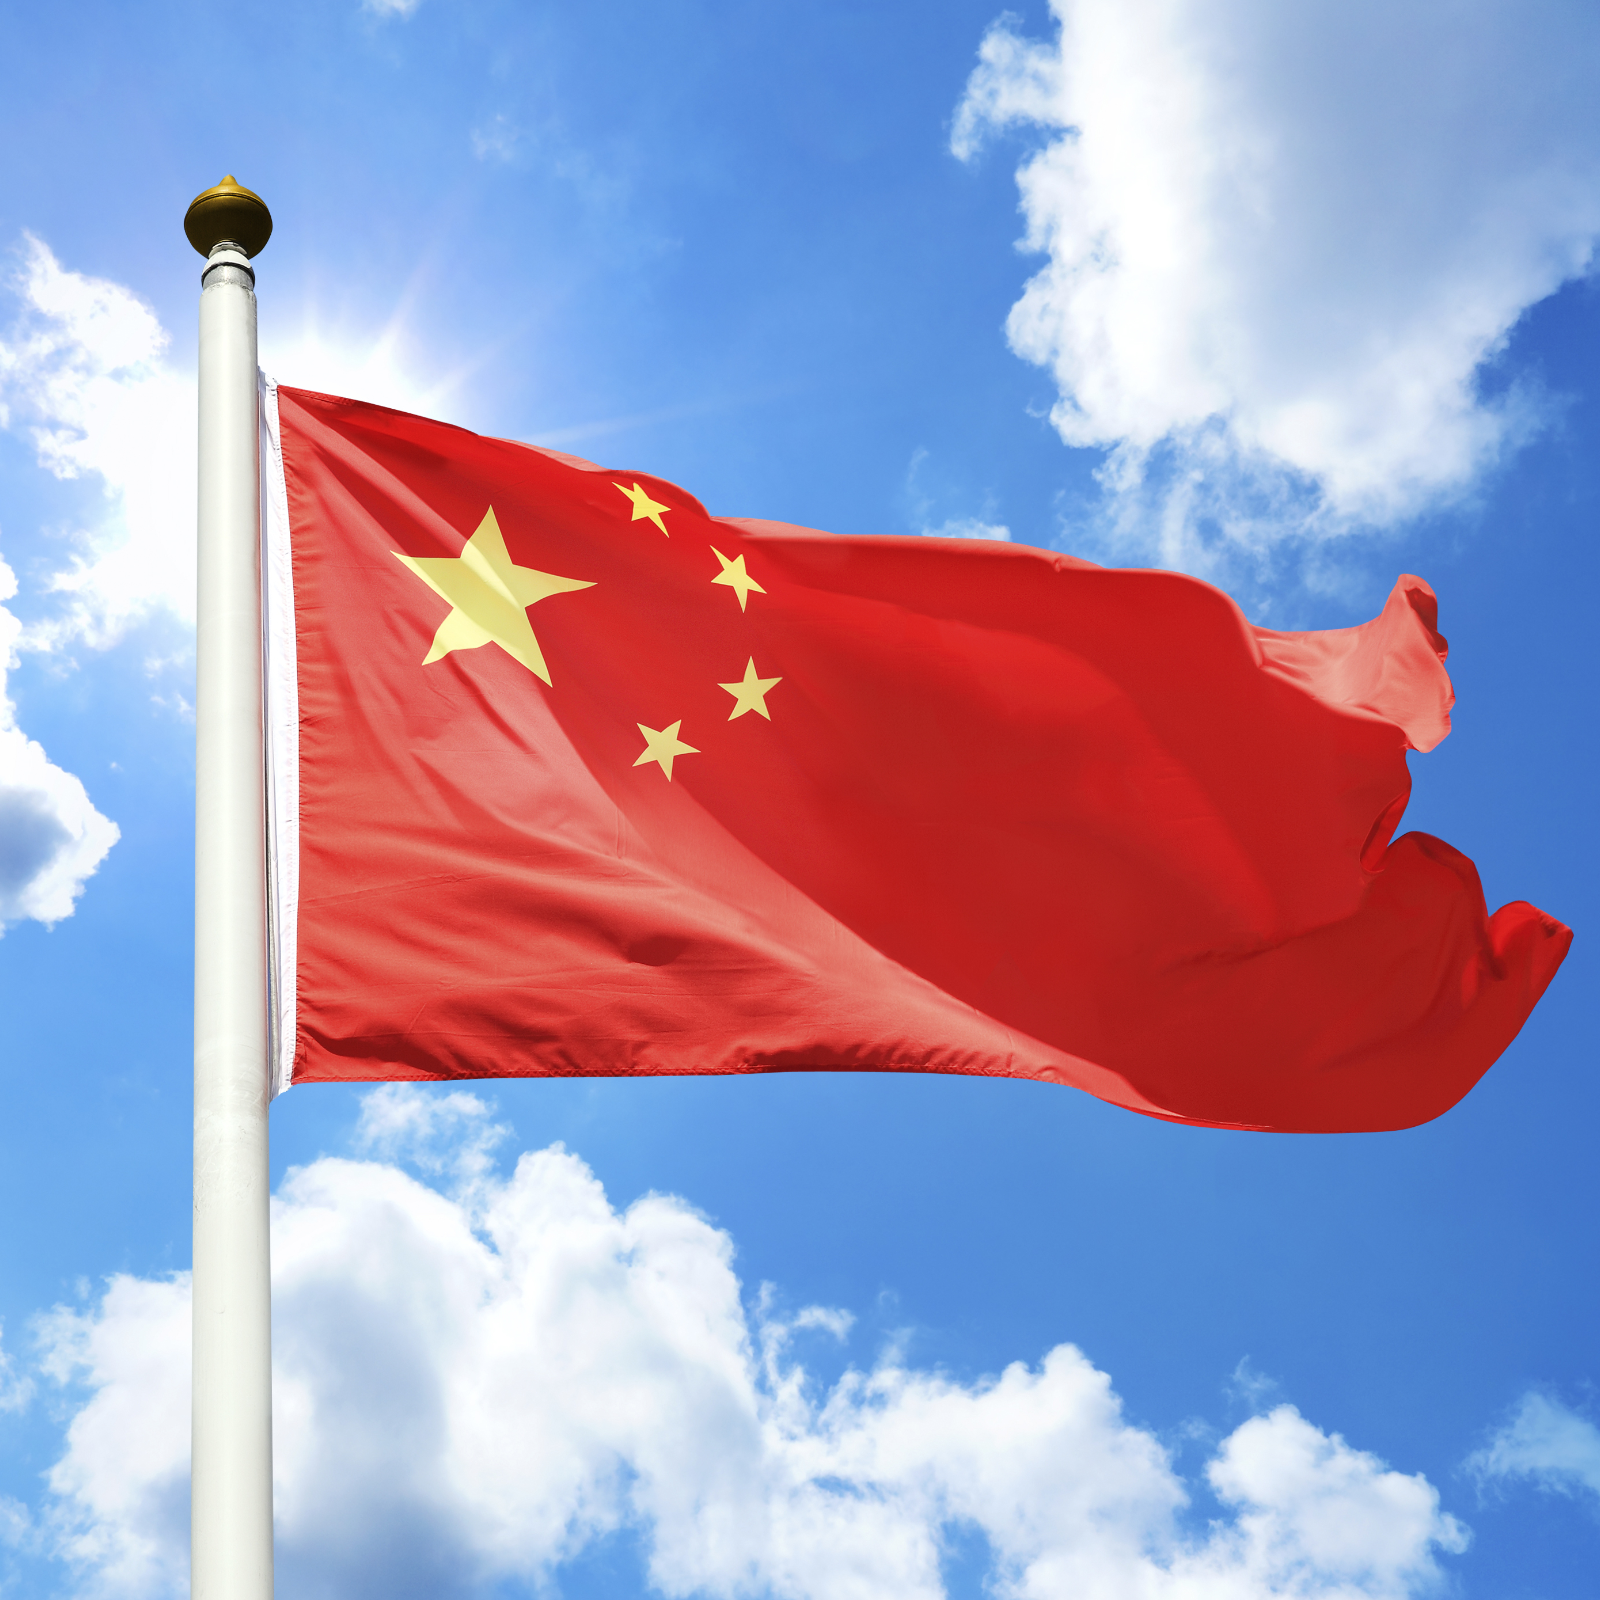 PBOC Provides Update on Its Crypto Prevention Efforts